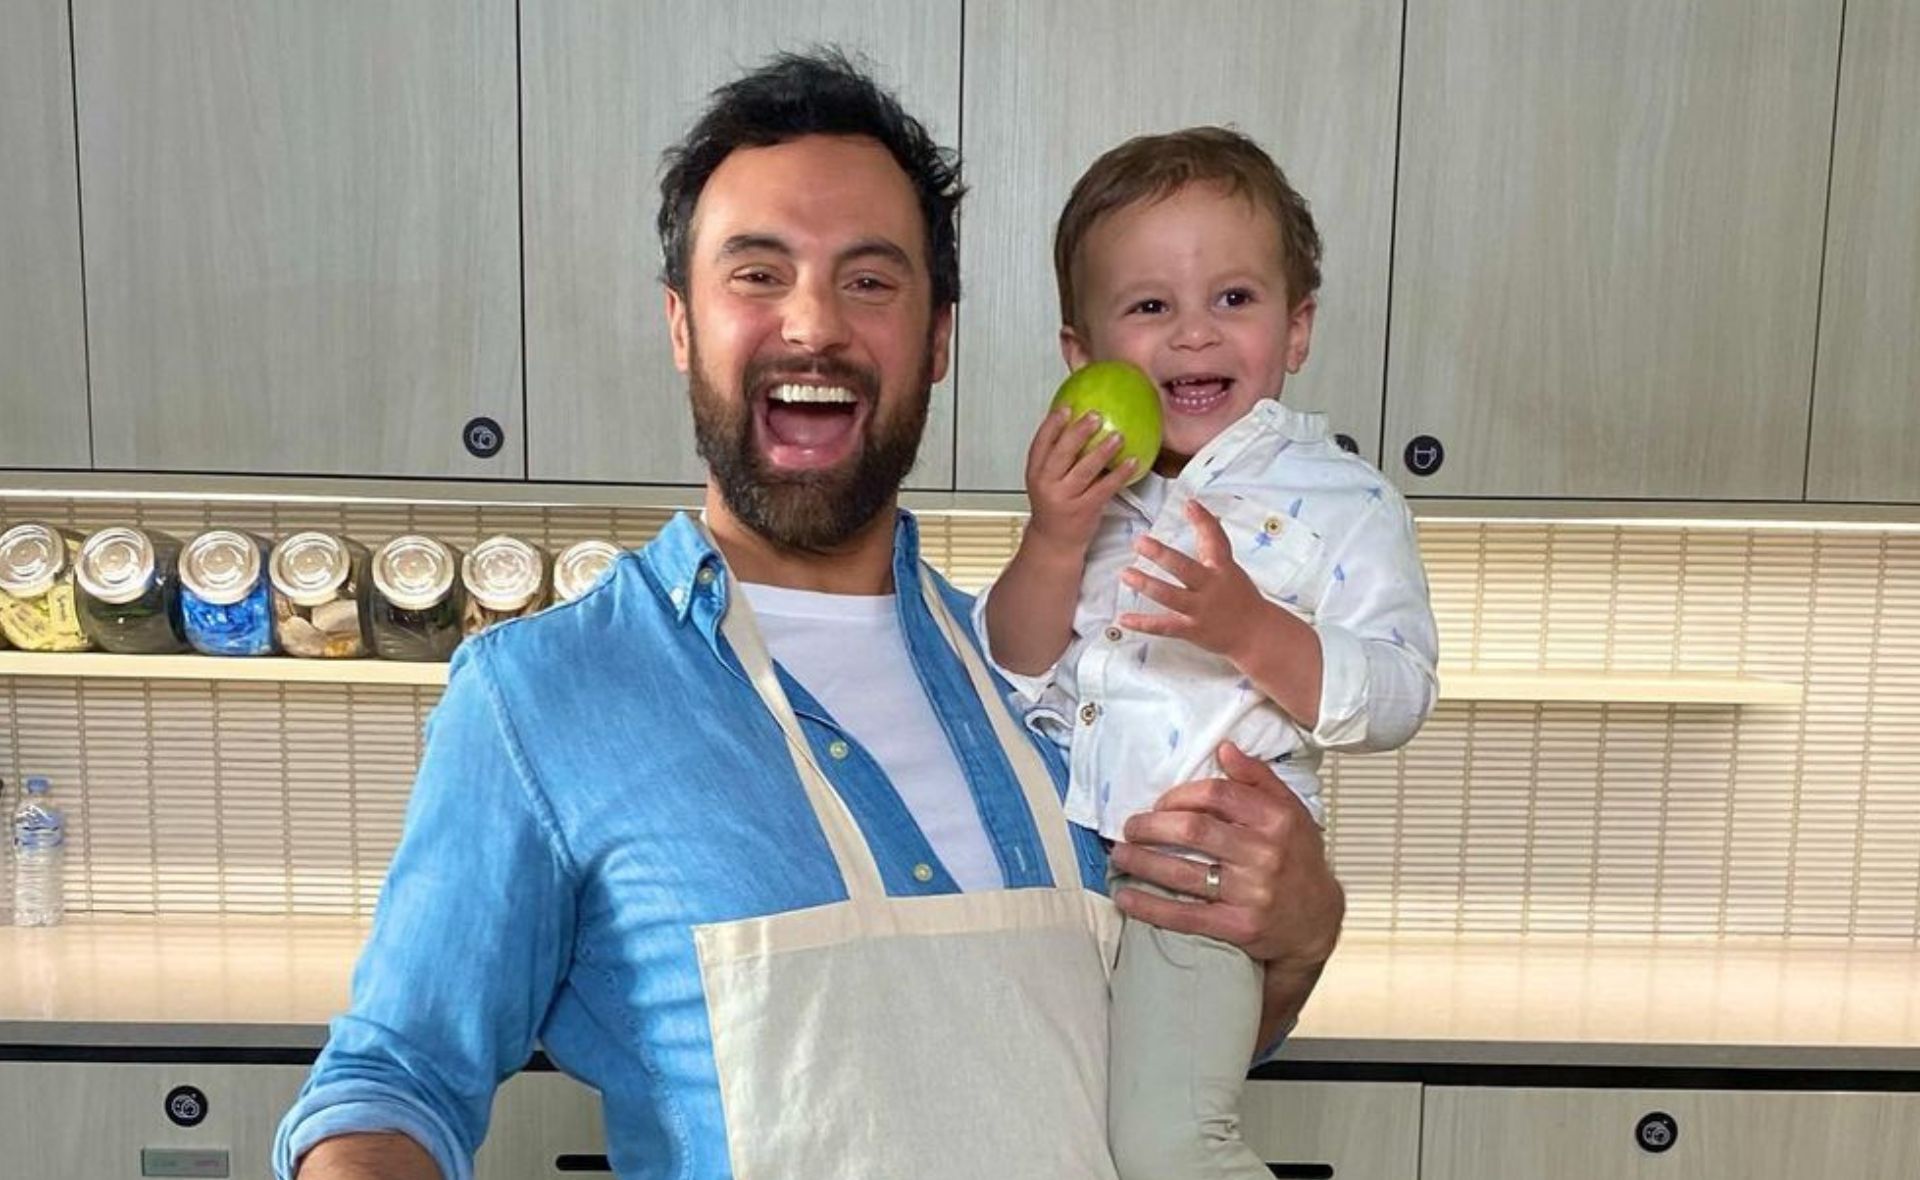 EXCLUSIVE: The good, the bad and in between, MAFS’ Cam Merchant opens up on being a dad